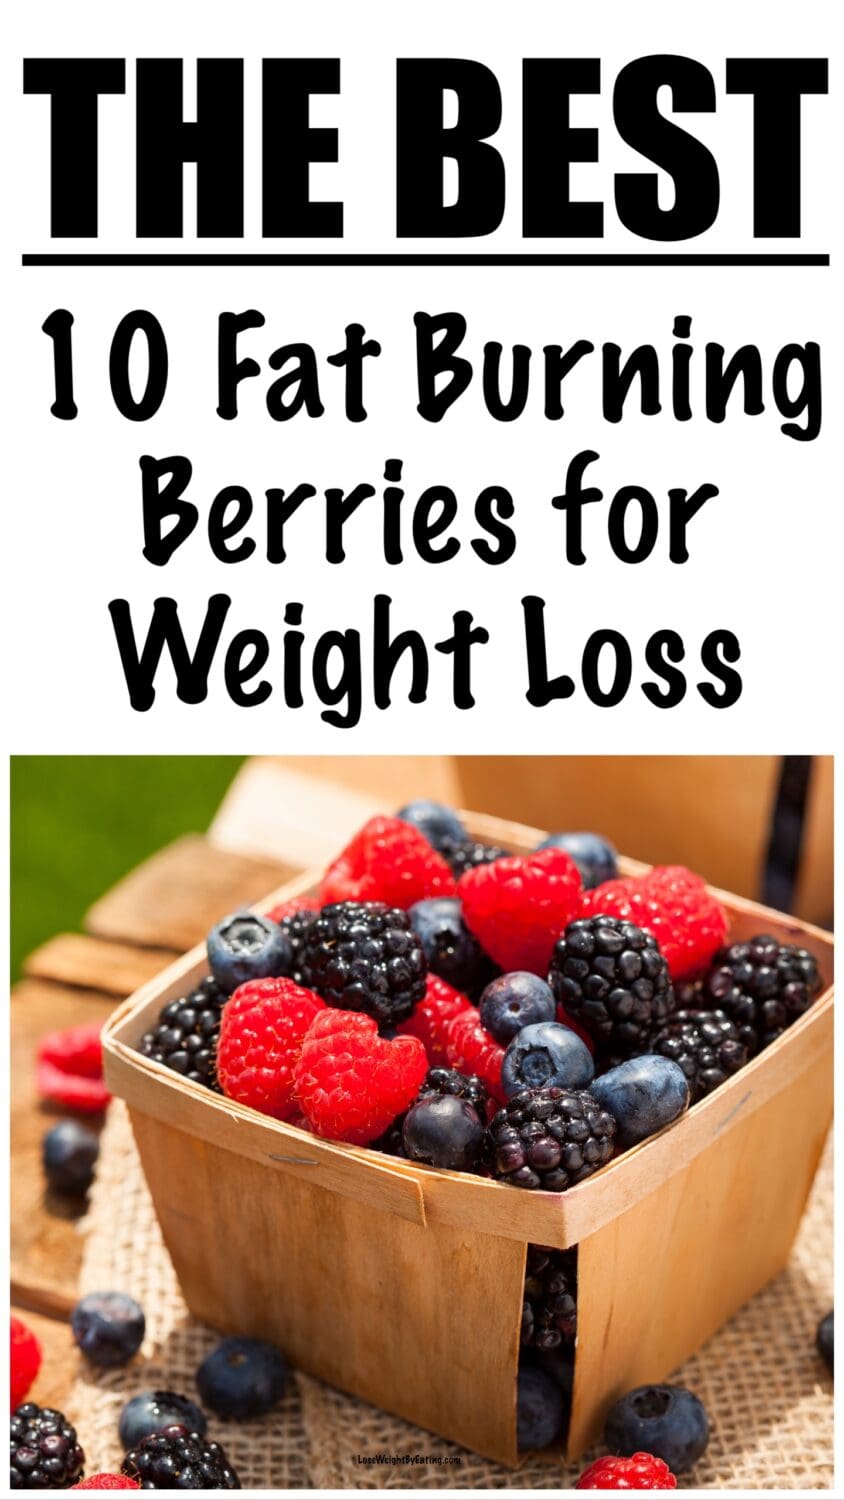 10 Fat Burning Berries for Weight Loss